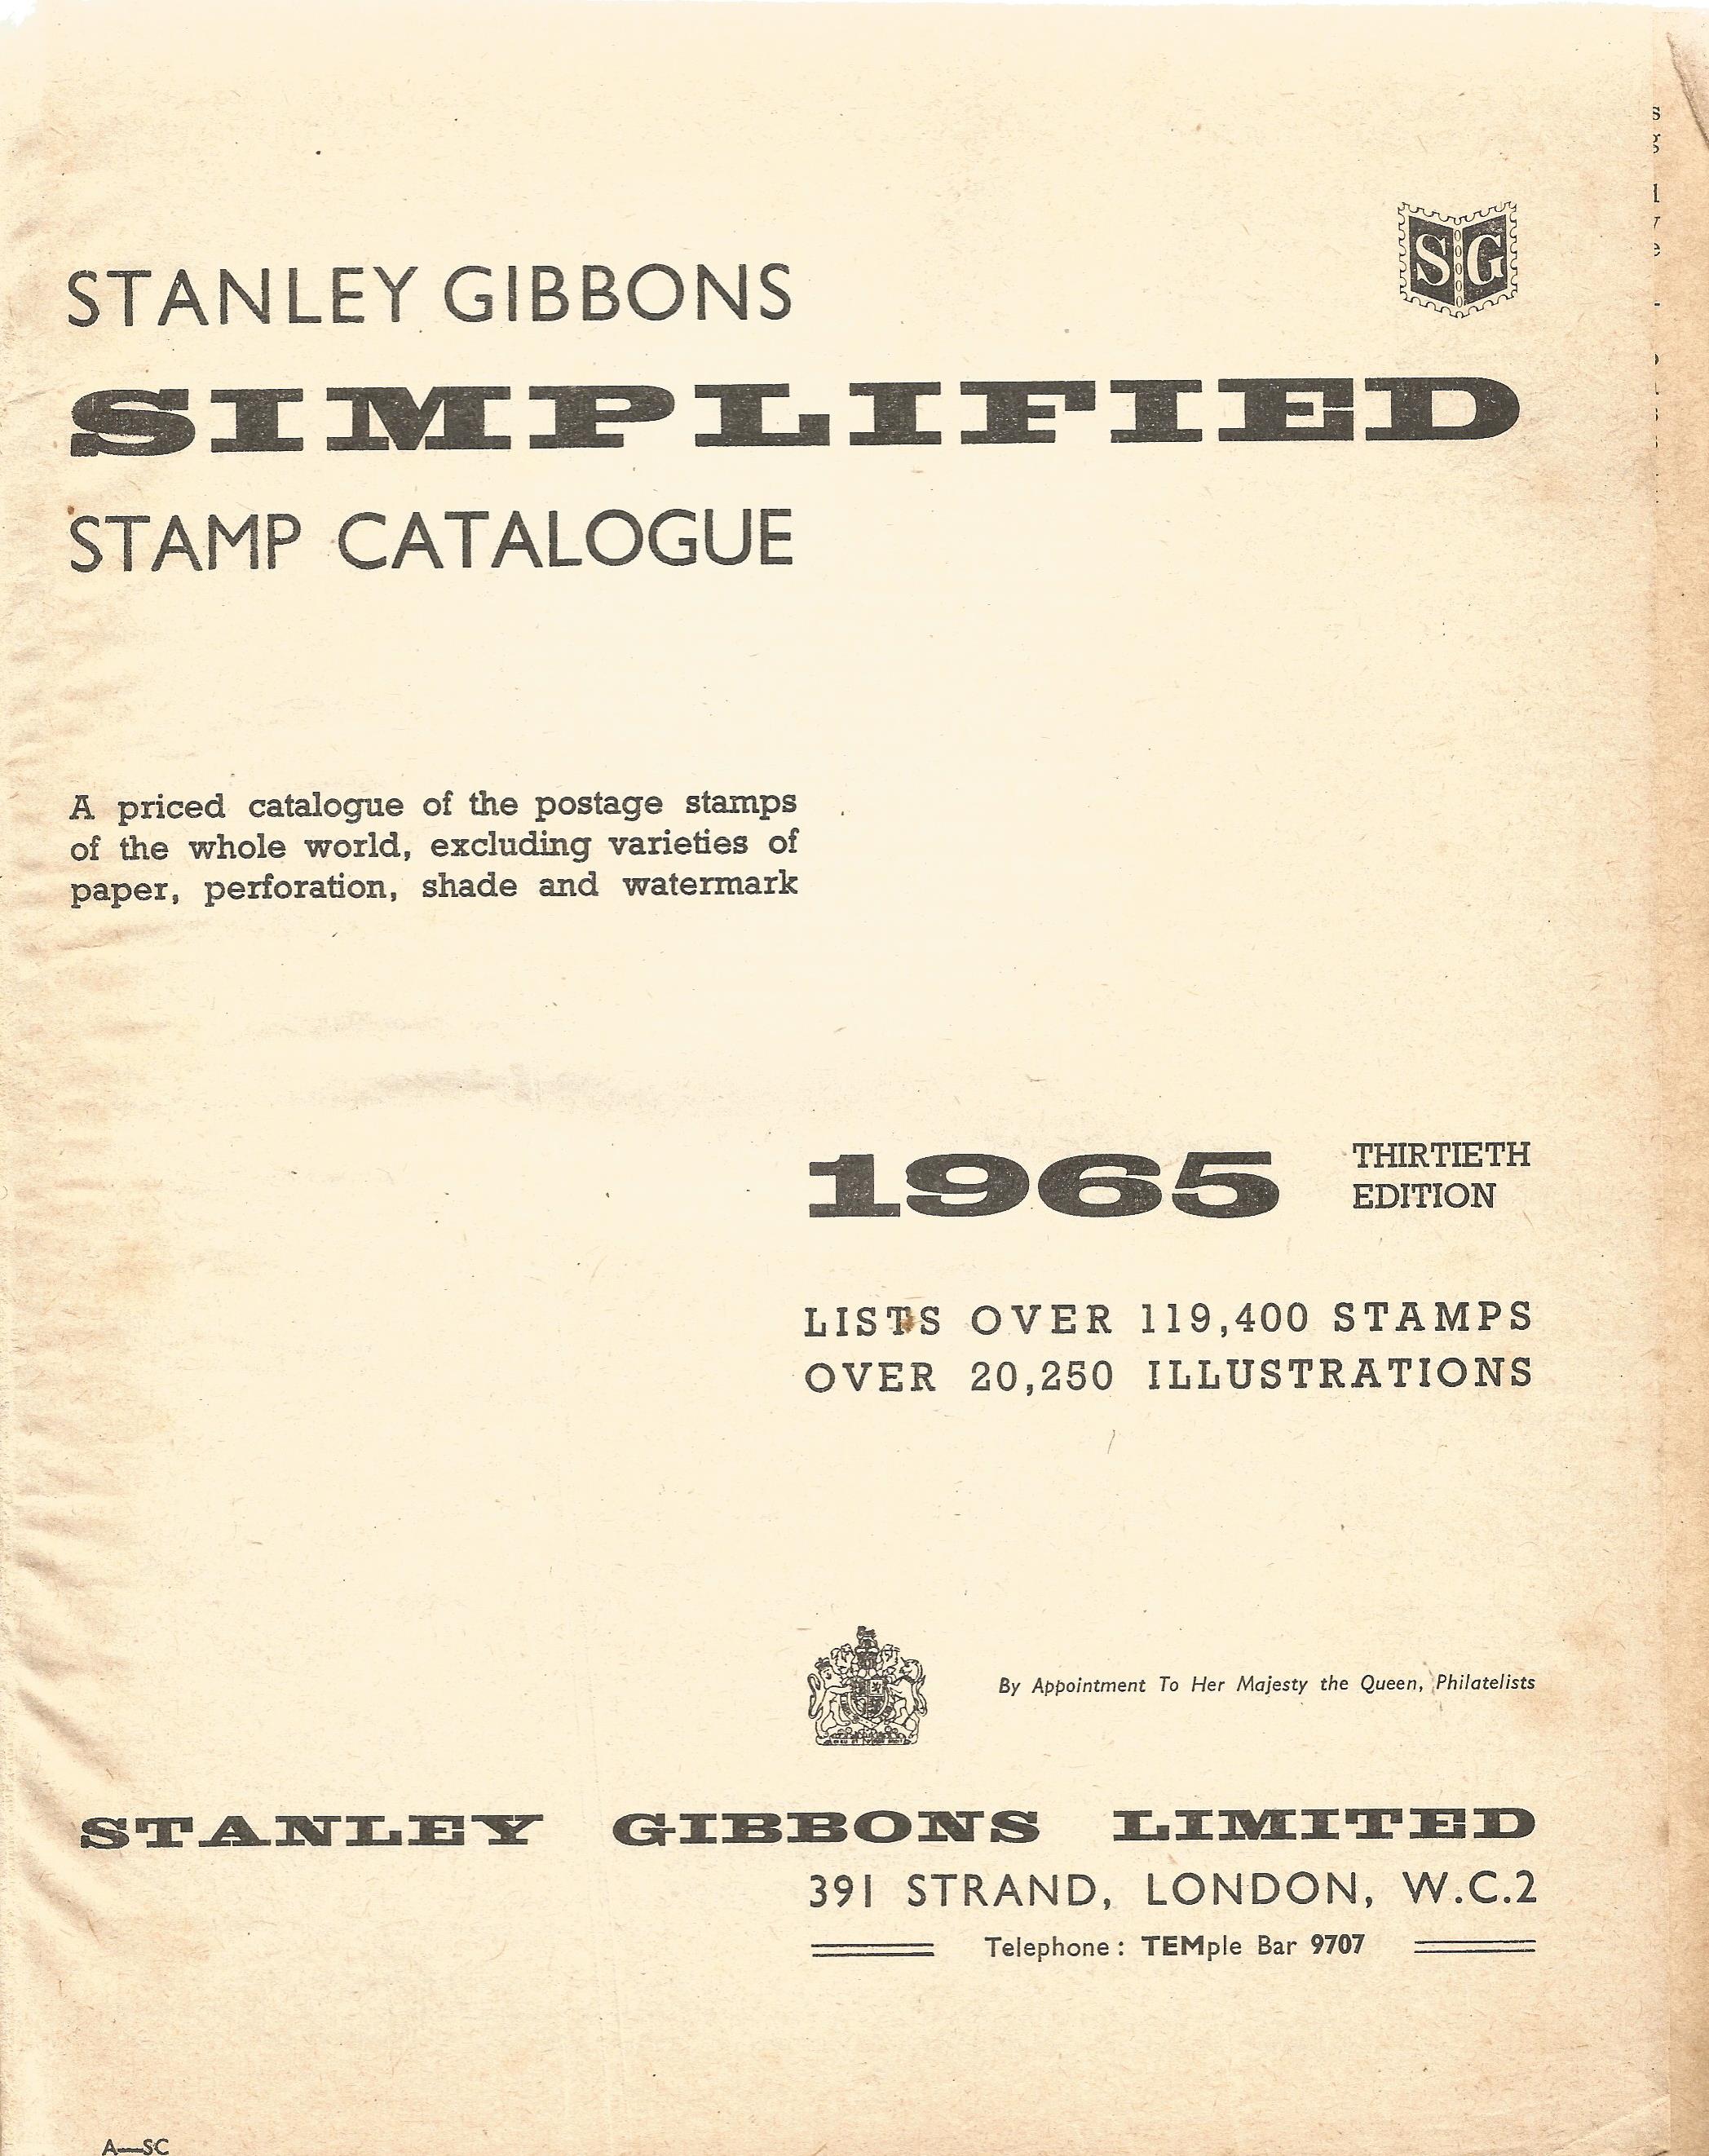 Stanley Gibbons hardback book Simplified Whole World Stamp Catalogue 1965 - All the Worlds Stamps - Image 2 of 2